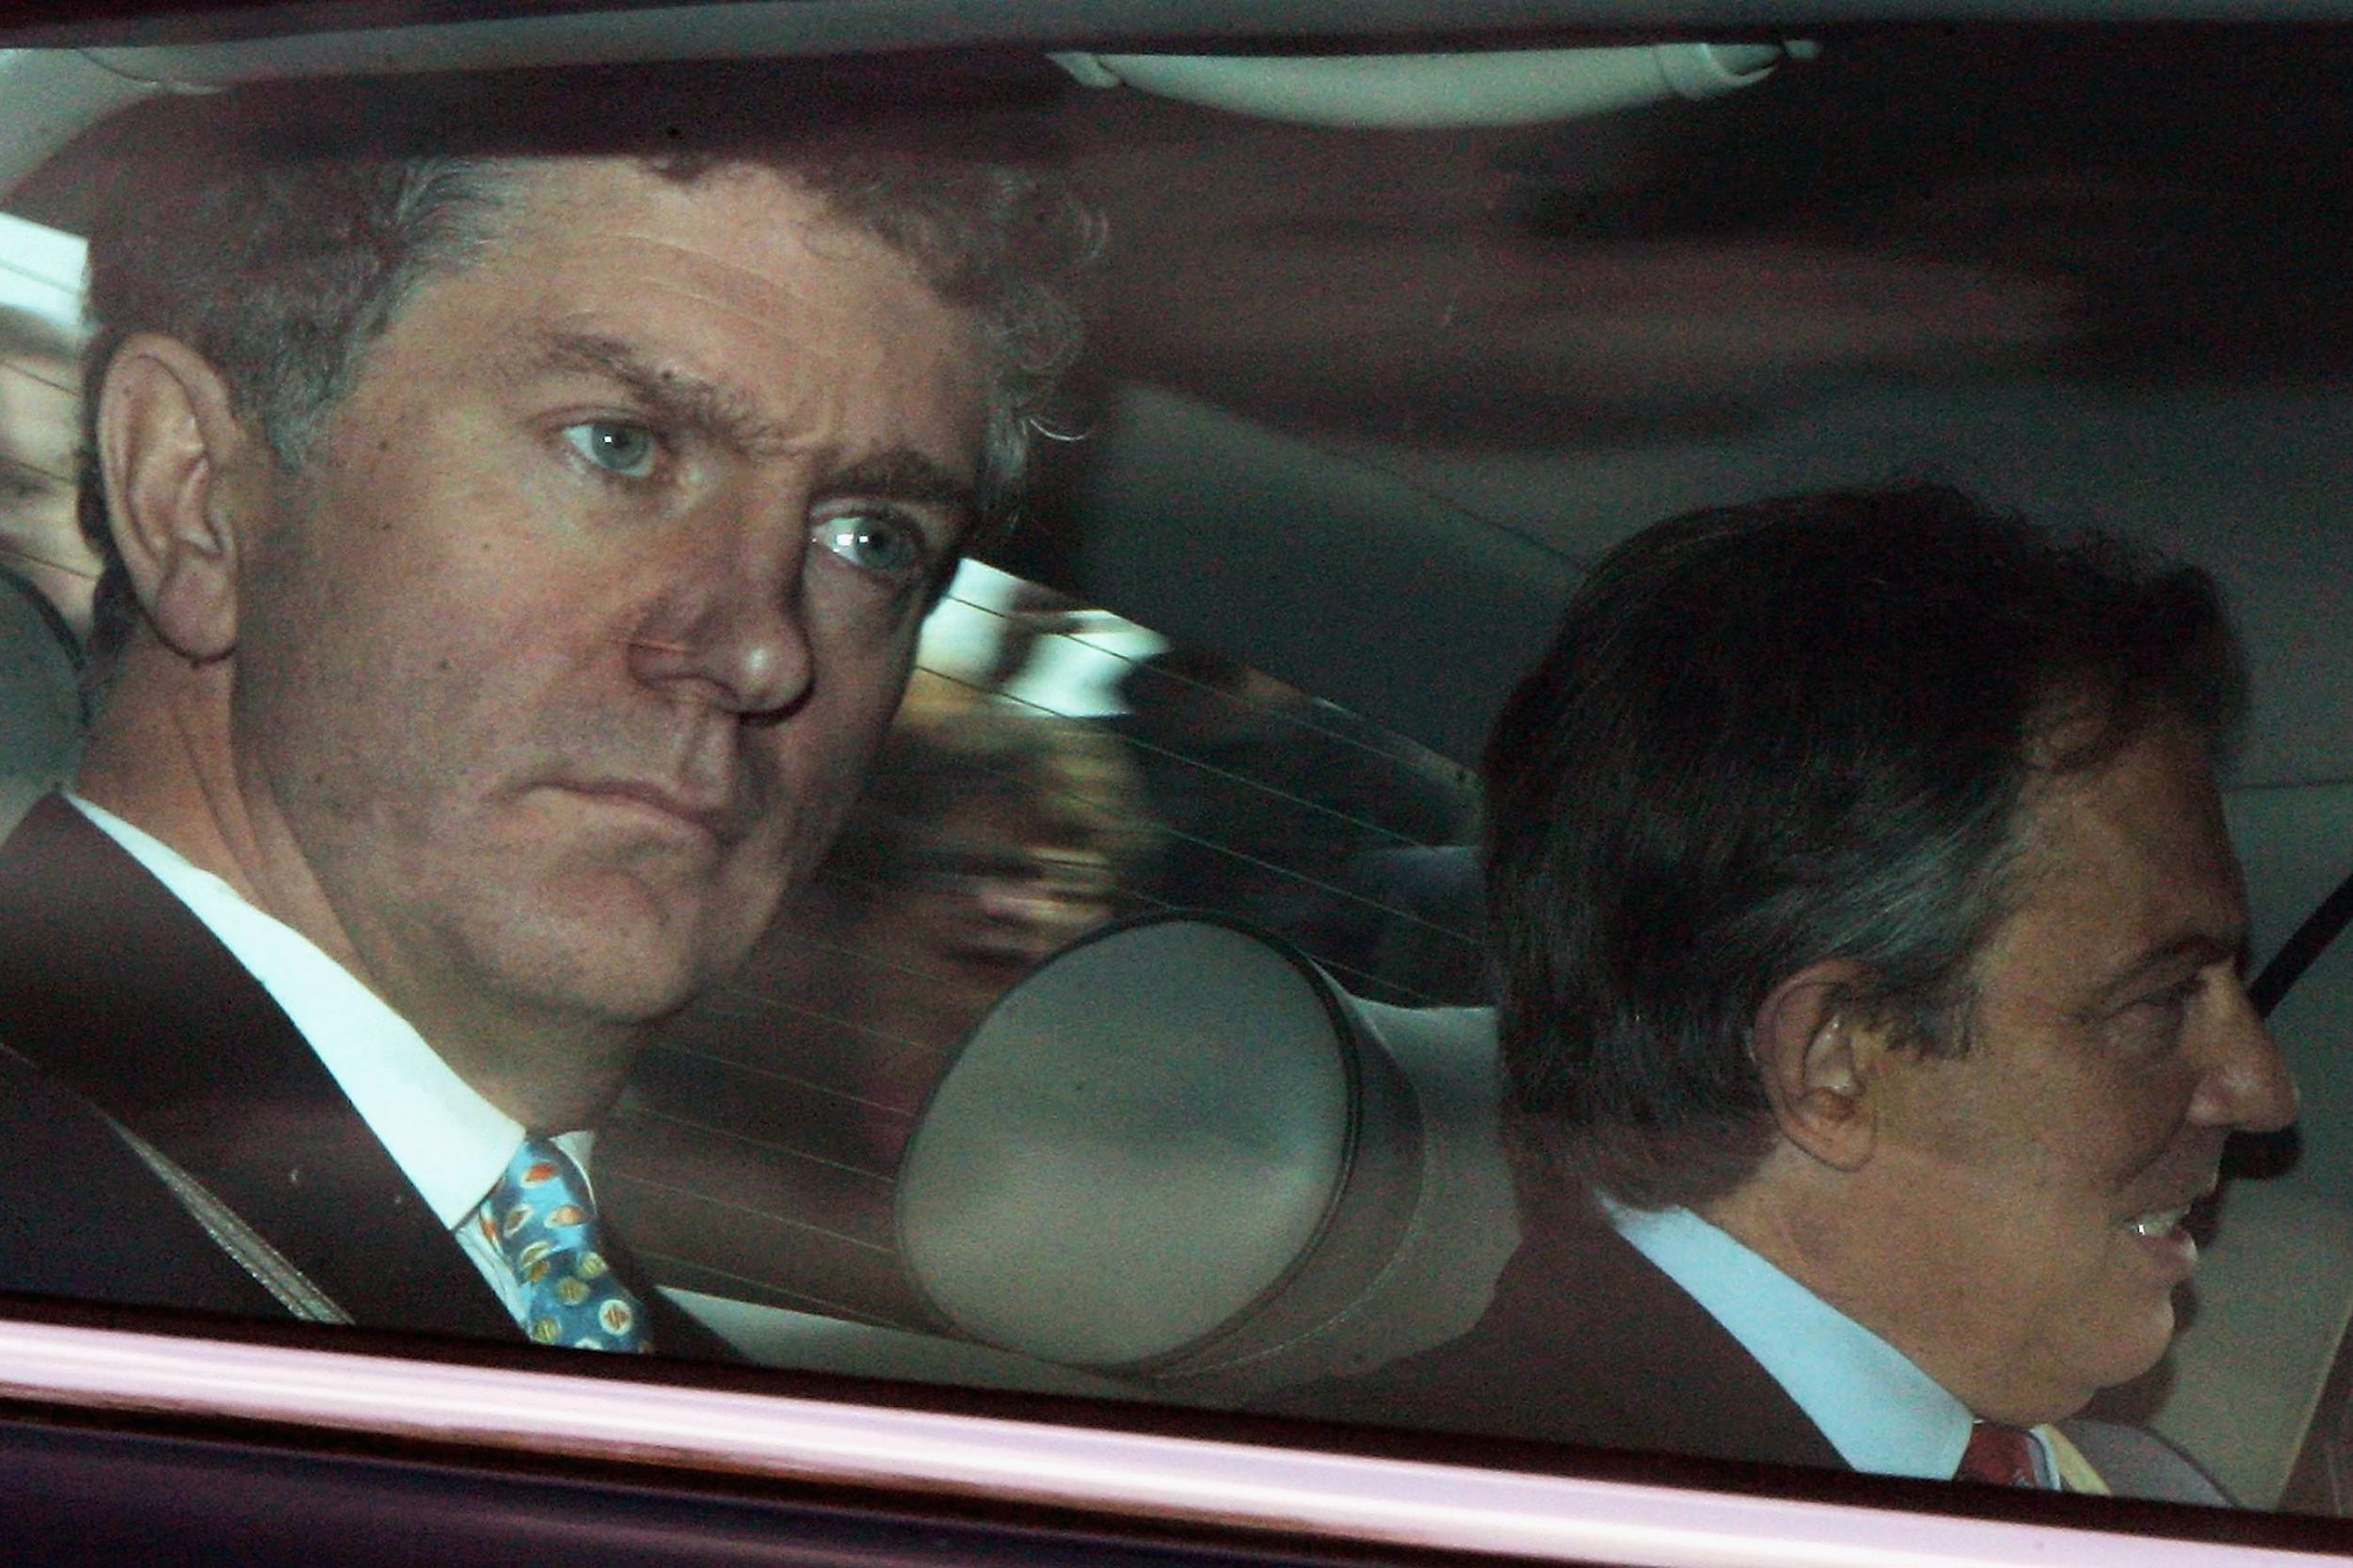 Tony Blair and his chief of staff Jonathan Powell arrive at Buckingham Palace in 2005, where he was due to ask the Queen’s permission to dissolve parliament and trigger a general election